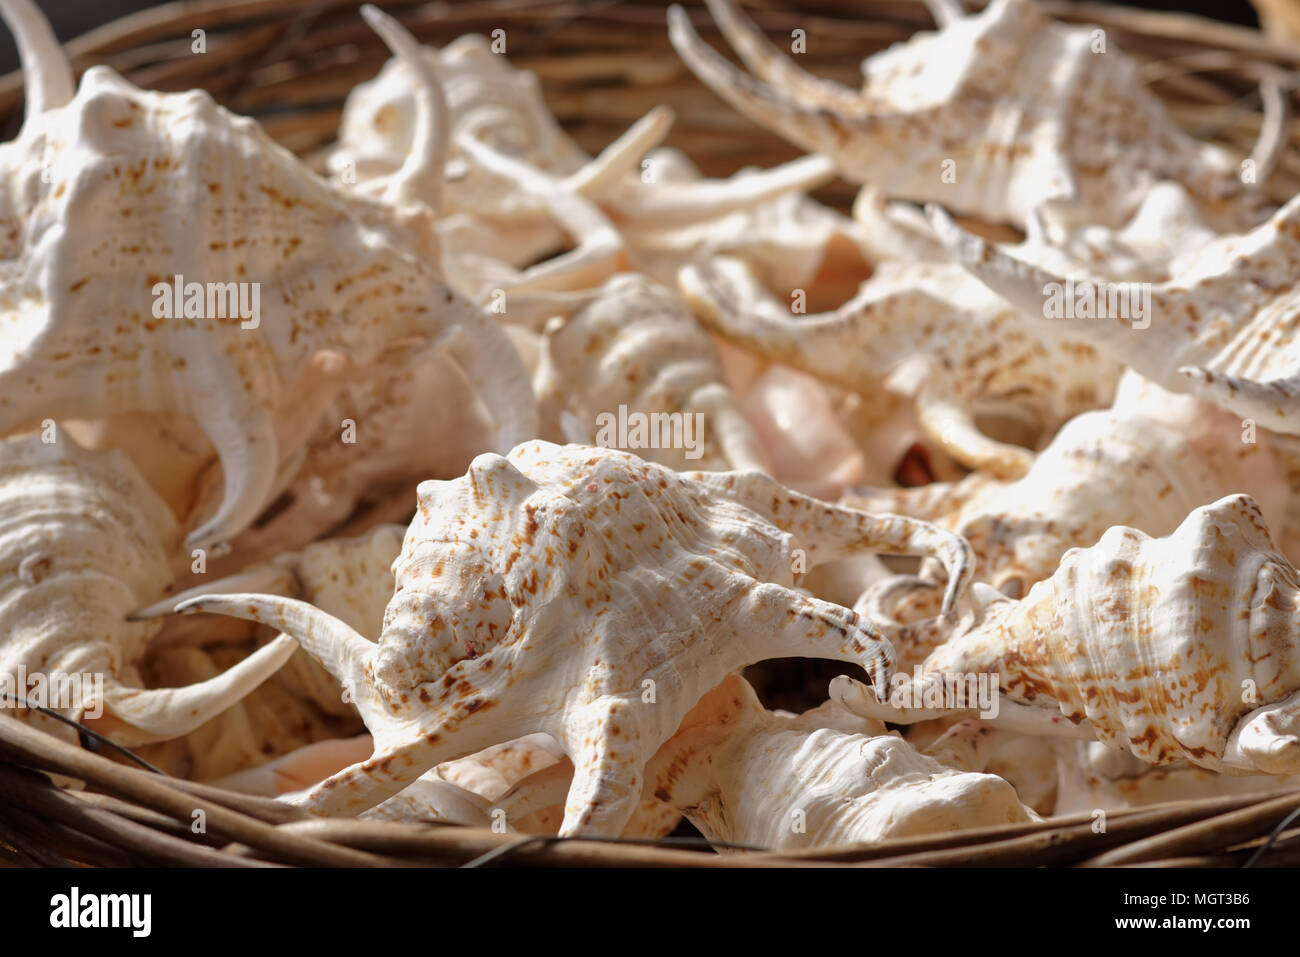 Sea shells in a basket. Selective focus on front shells Stock Photo